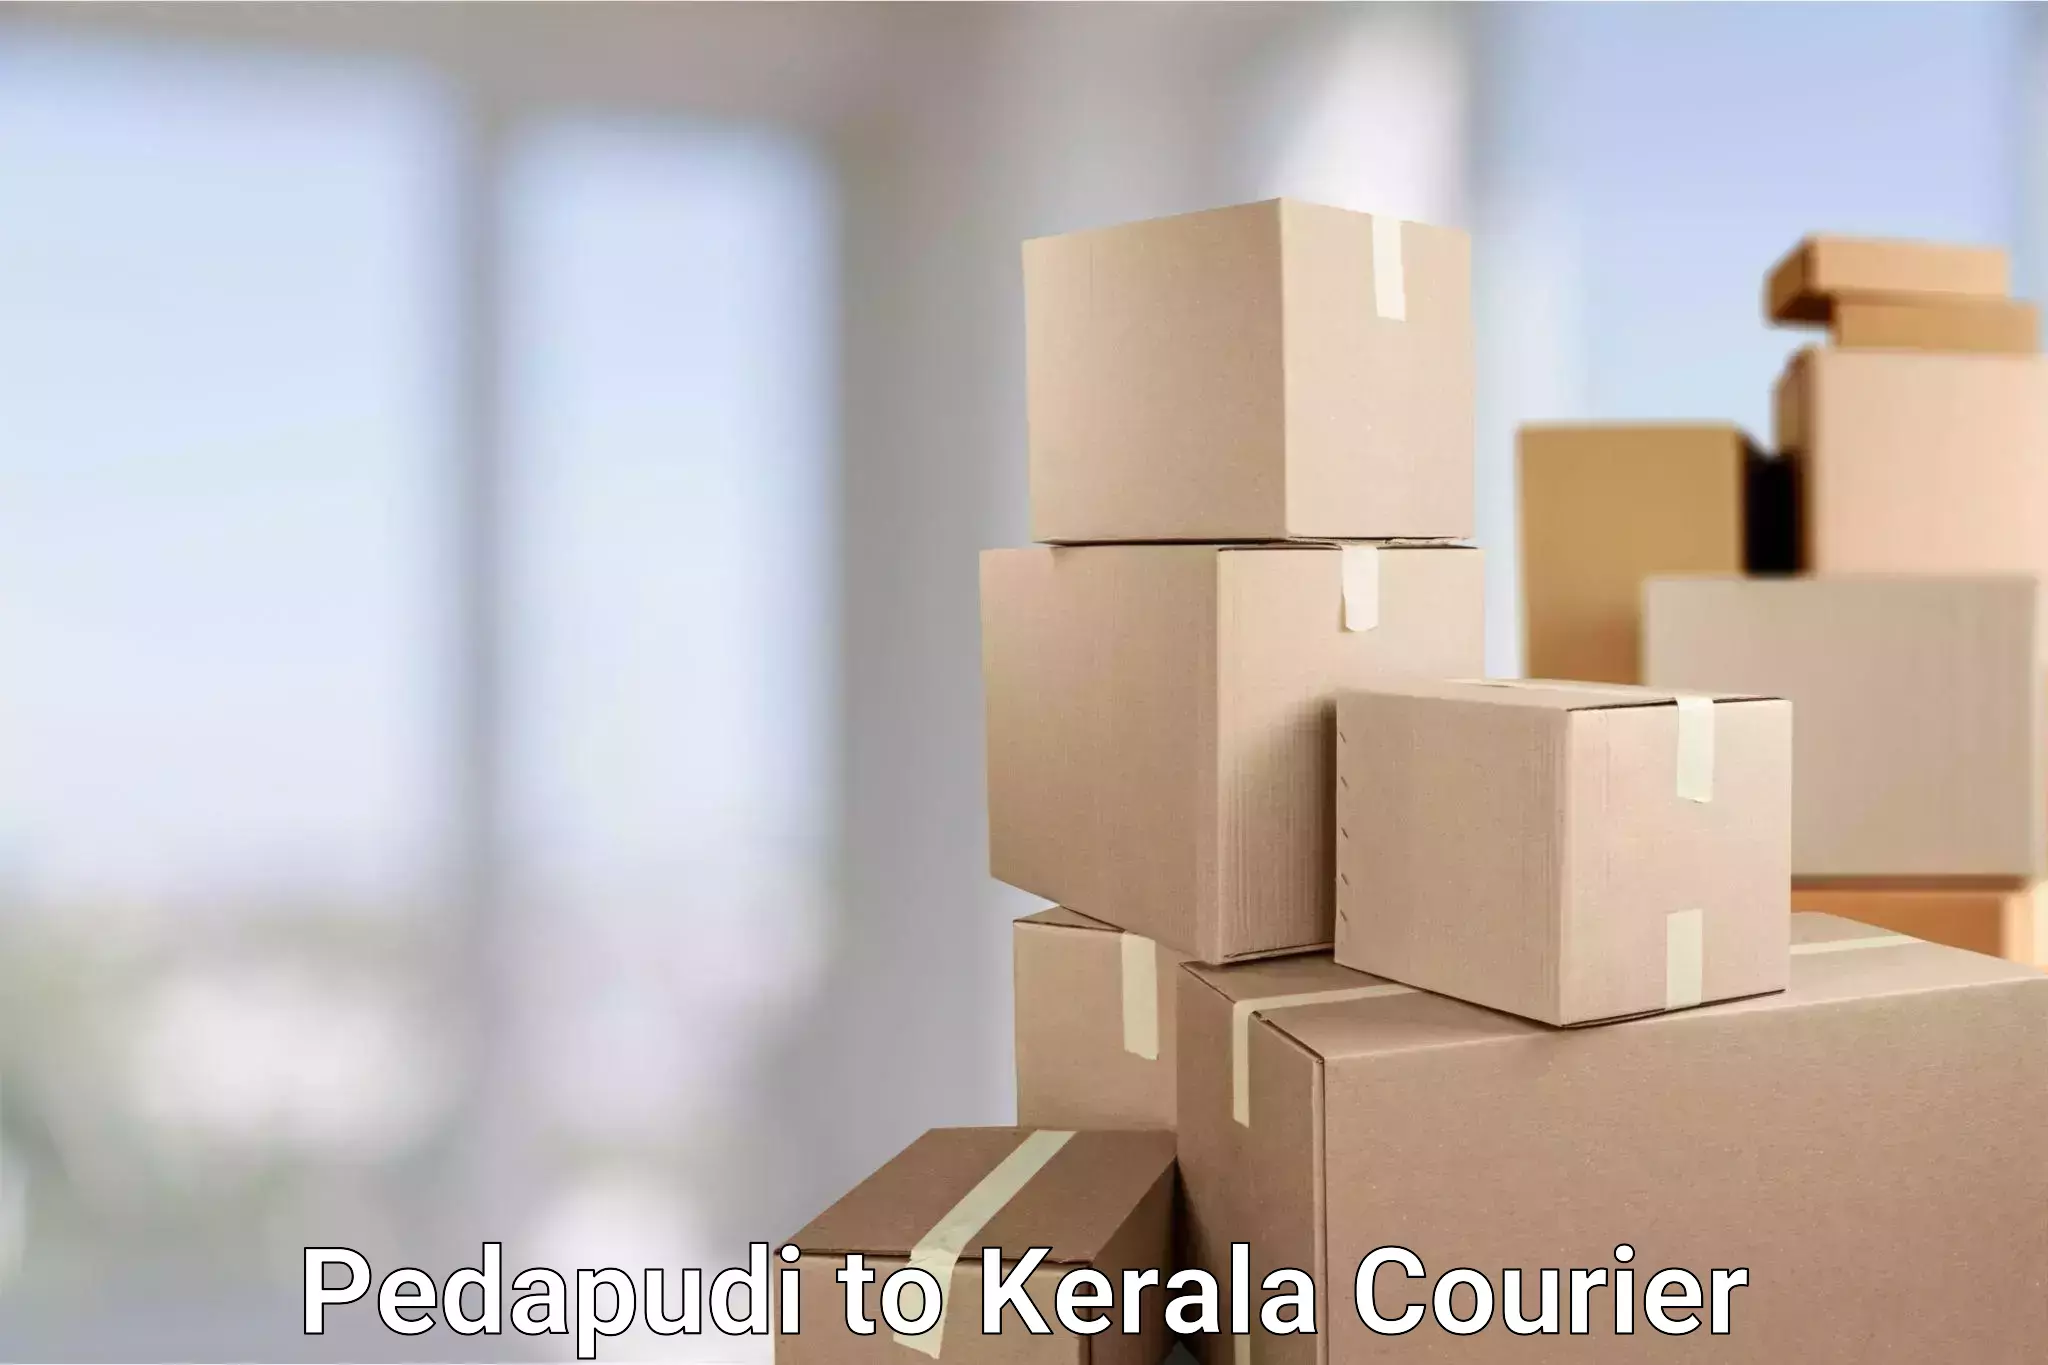 Track and trace shipping in Pedapudi to Kerala